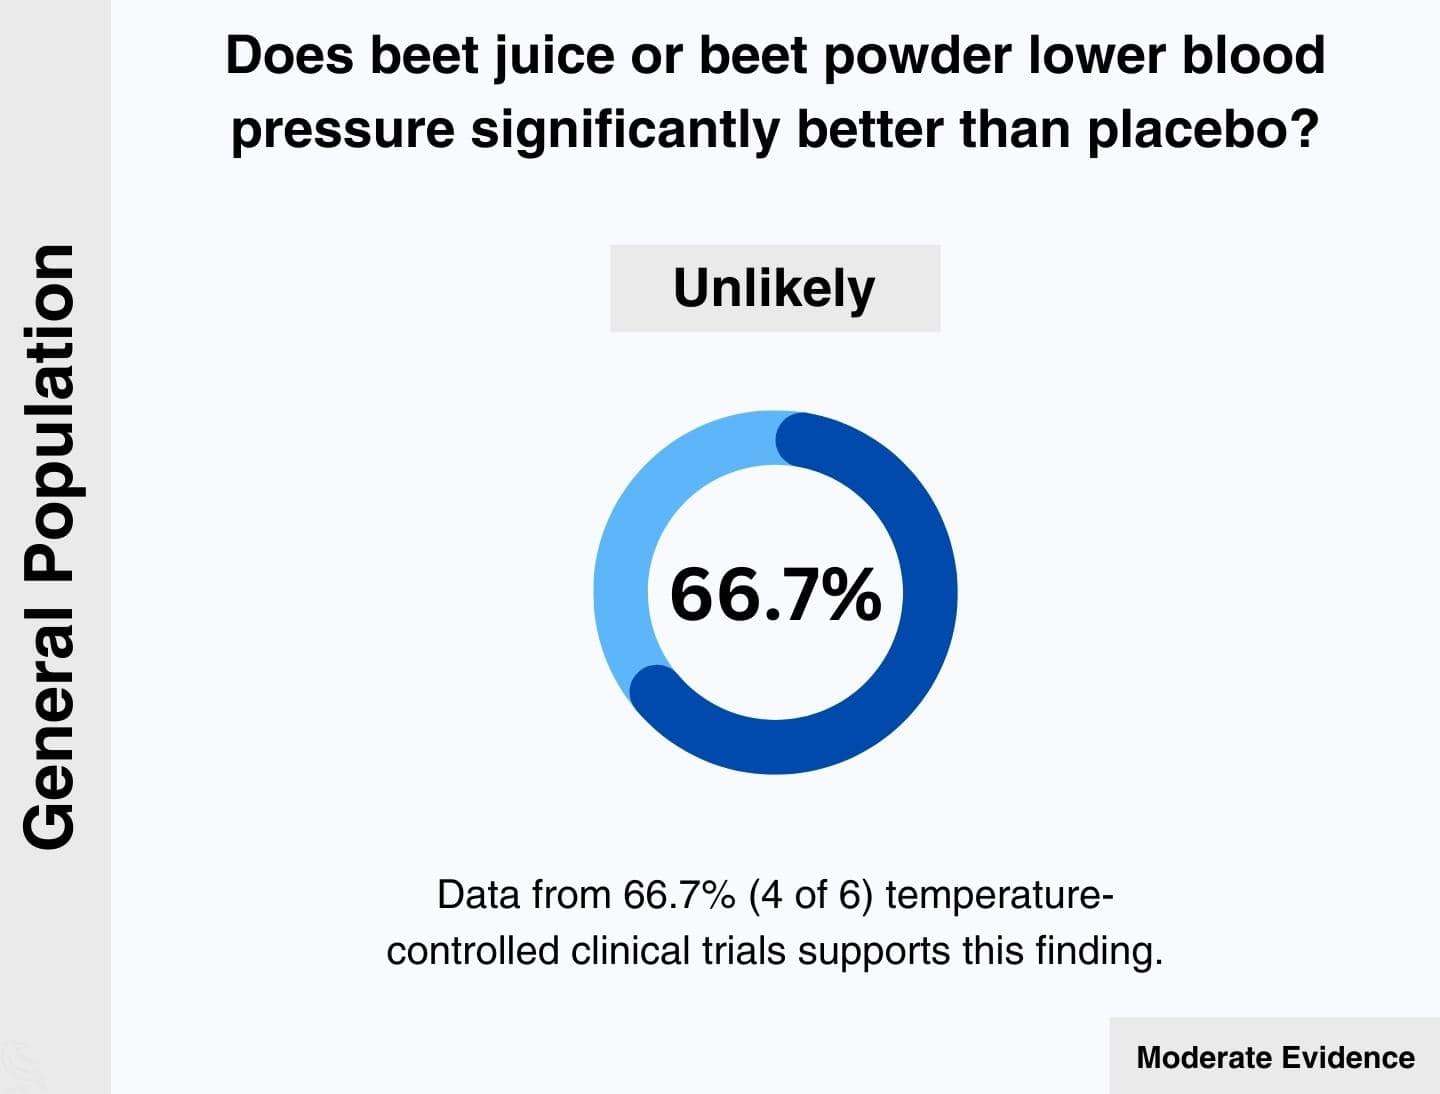 In the general adult population: 66.7% of relevant temperature-controlled clinical trials agree that beet juice is unlikely to lower blood pressure significantly better than placebo.